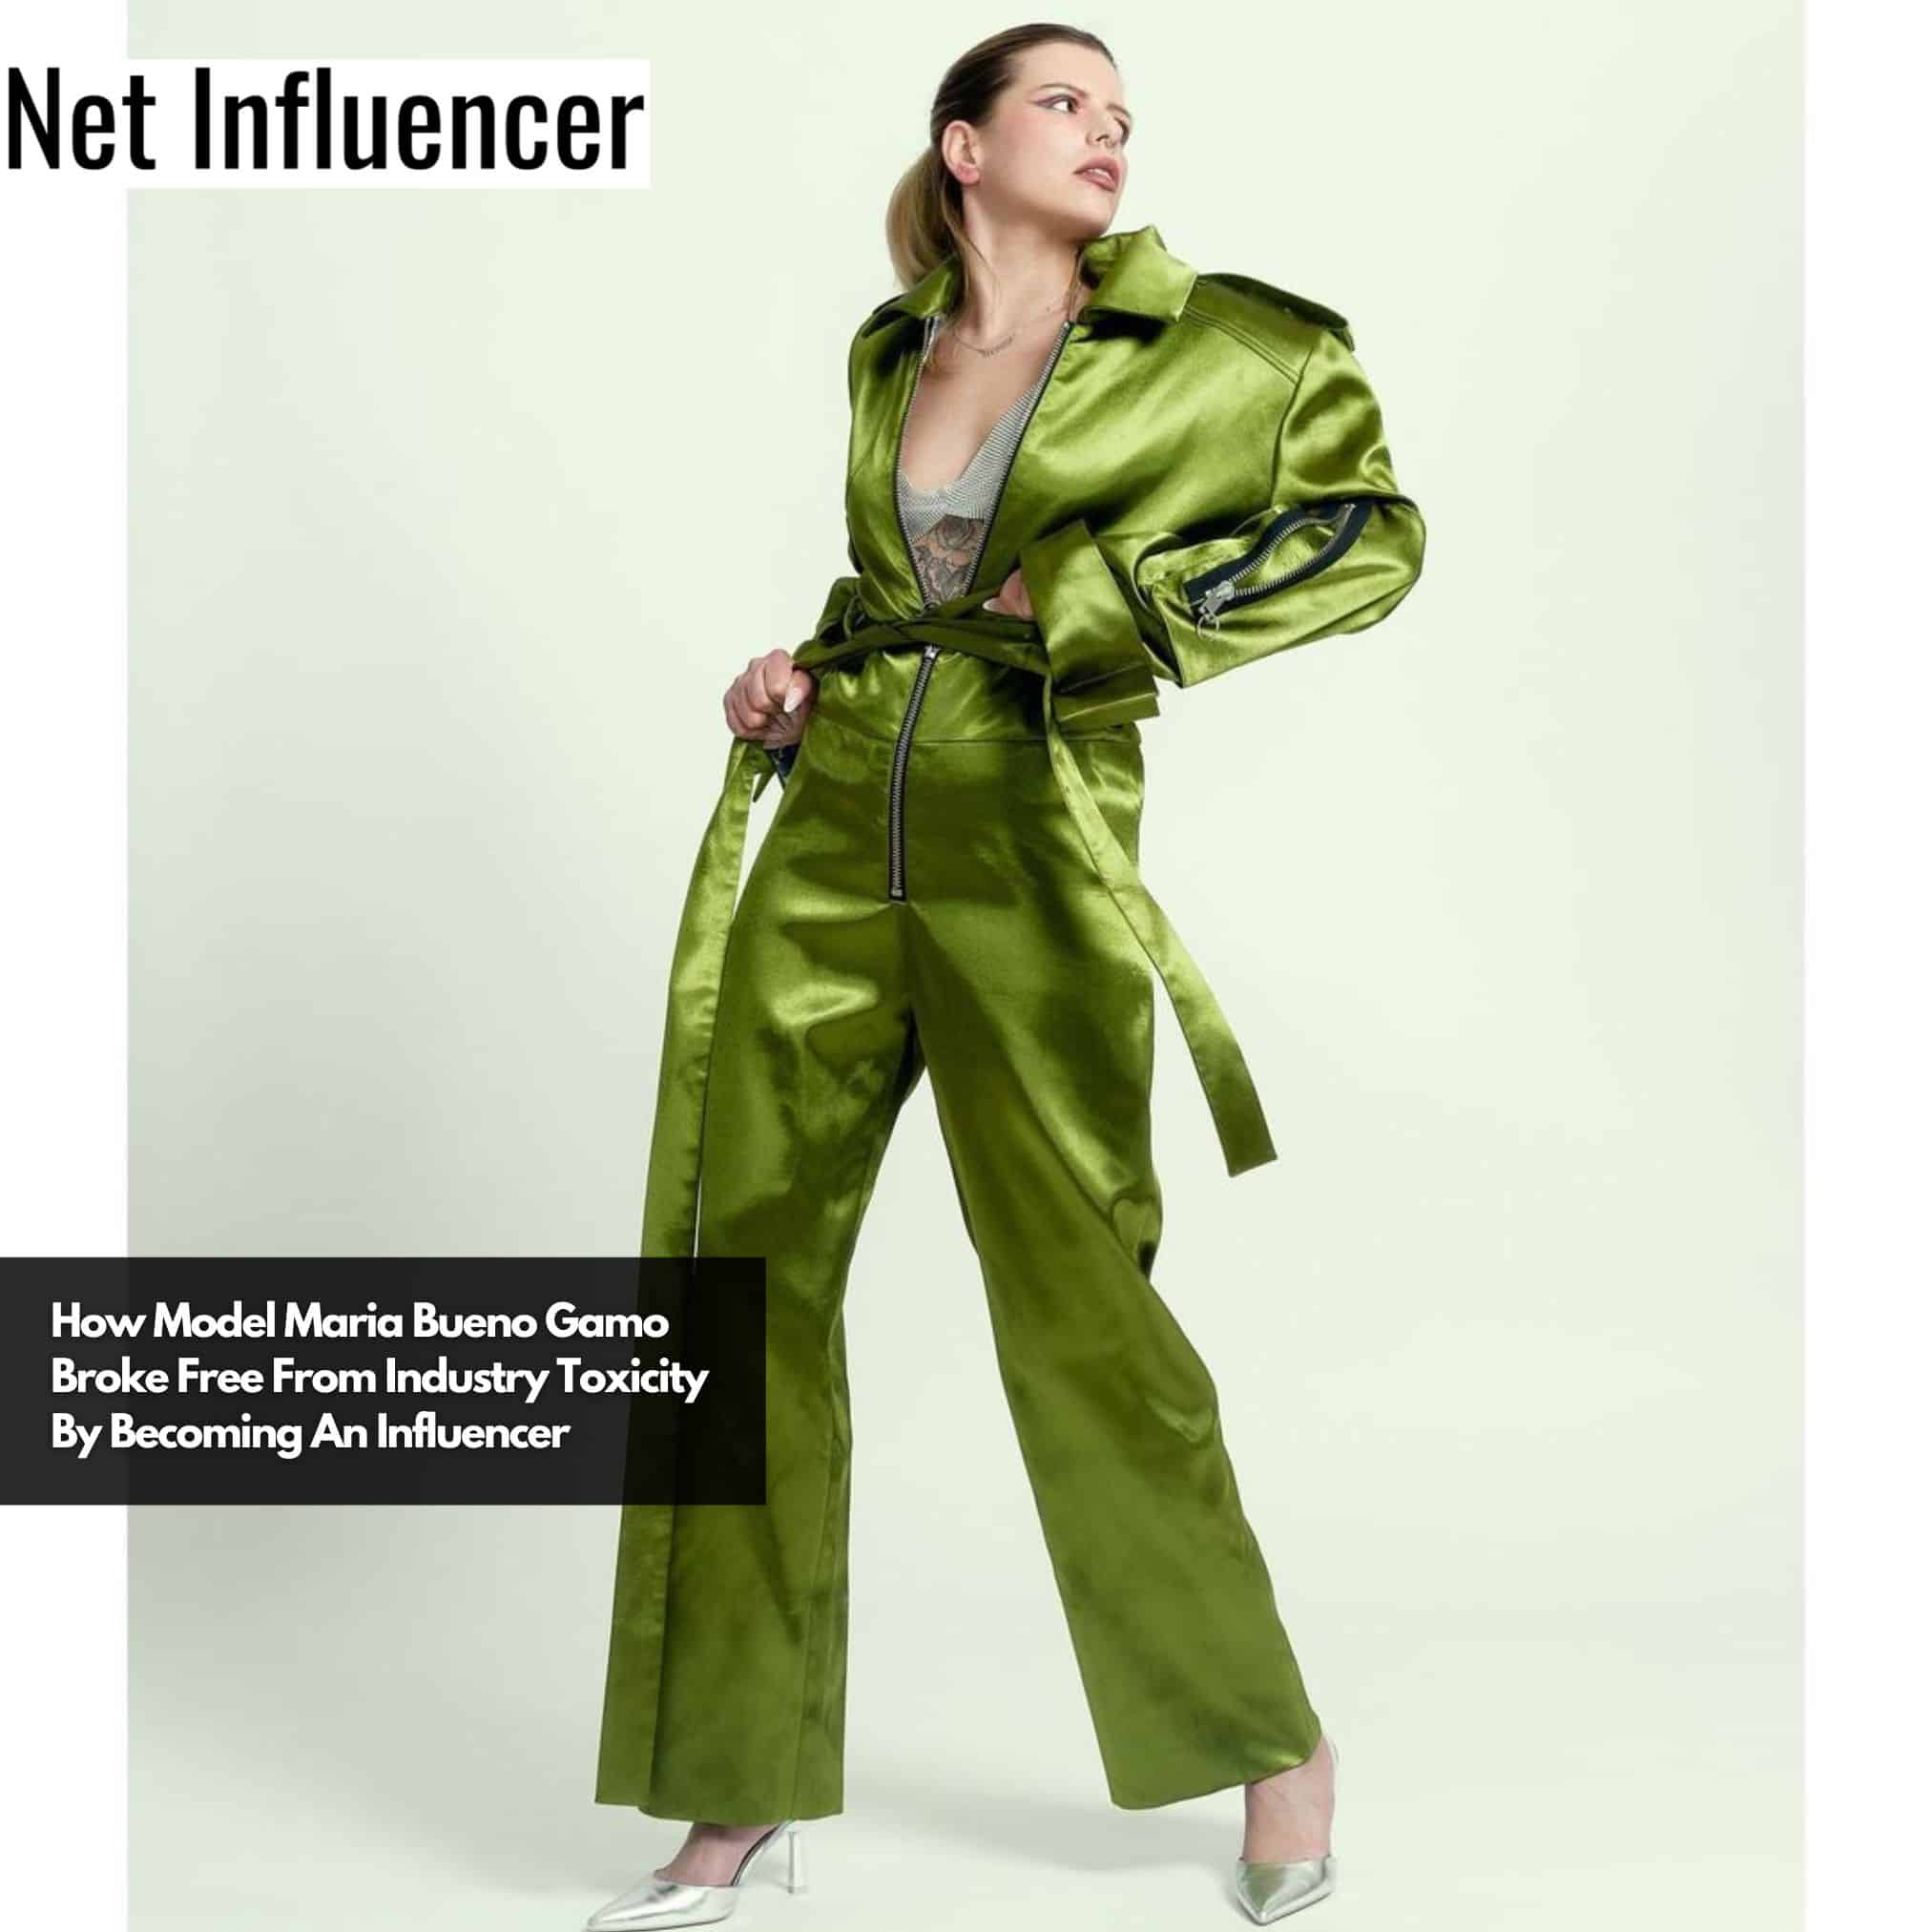 How Model Maria Bueno Gamo Broke Free From Industry Toxicity By Becoming An Influencer